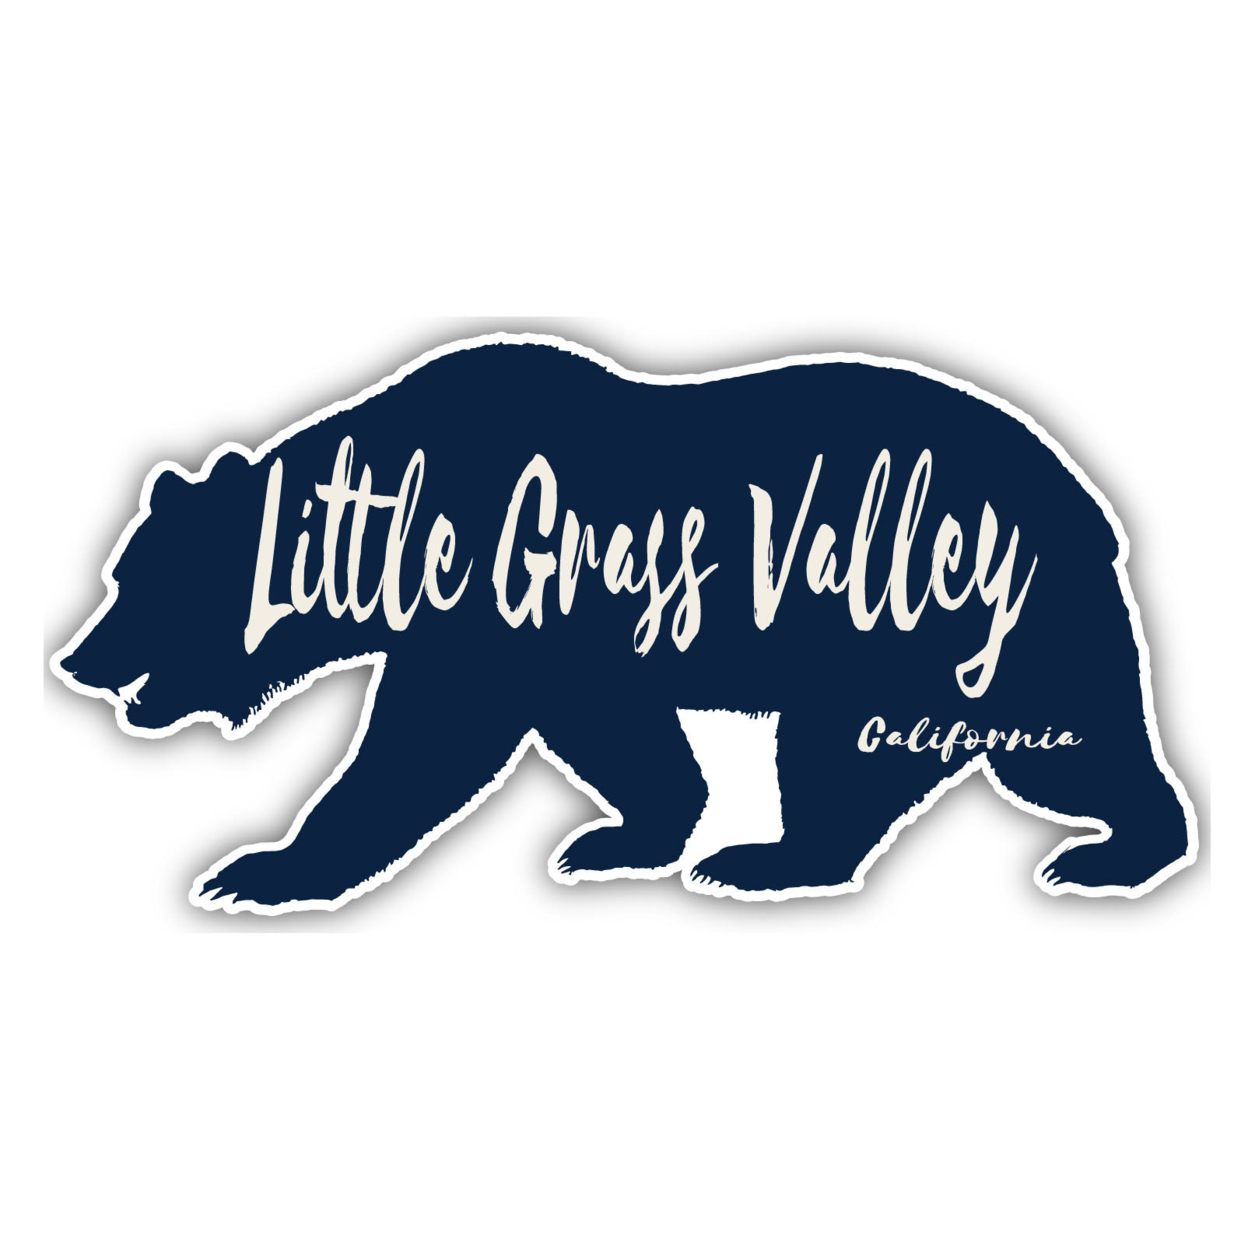 Little Grass Valley California Souvenir Decorative Stickers (Choose Theme And Size) - 4-Inch, Bear